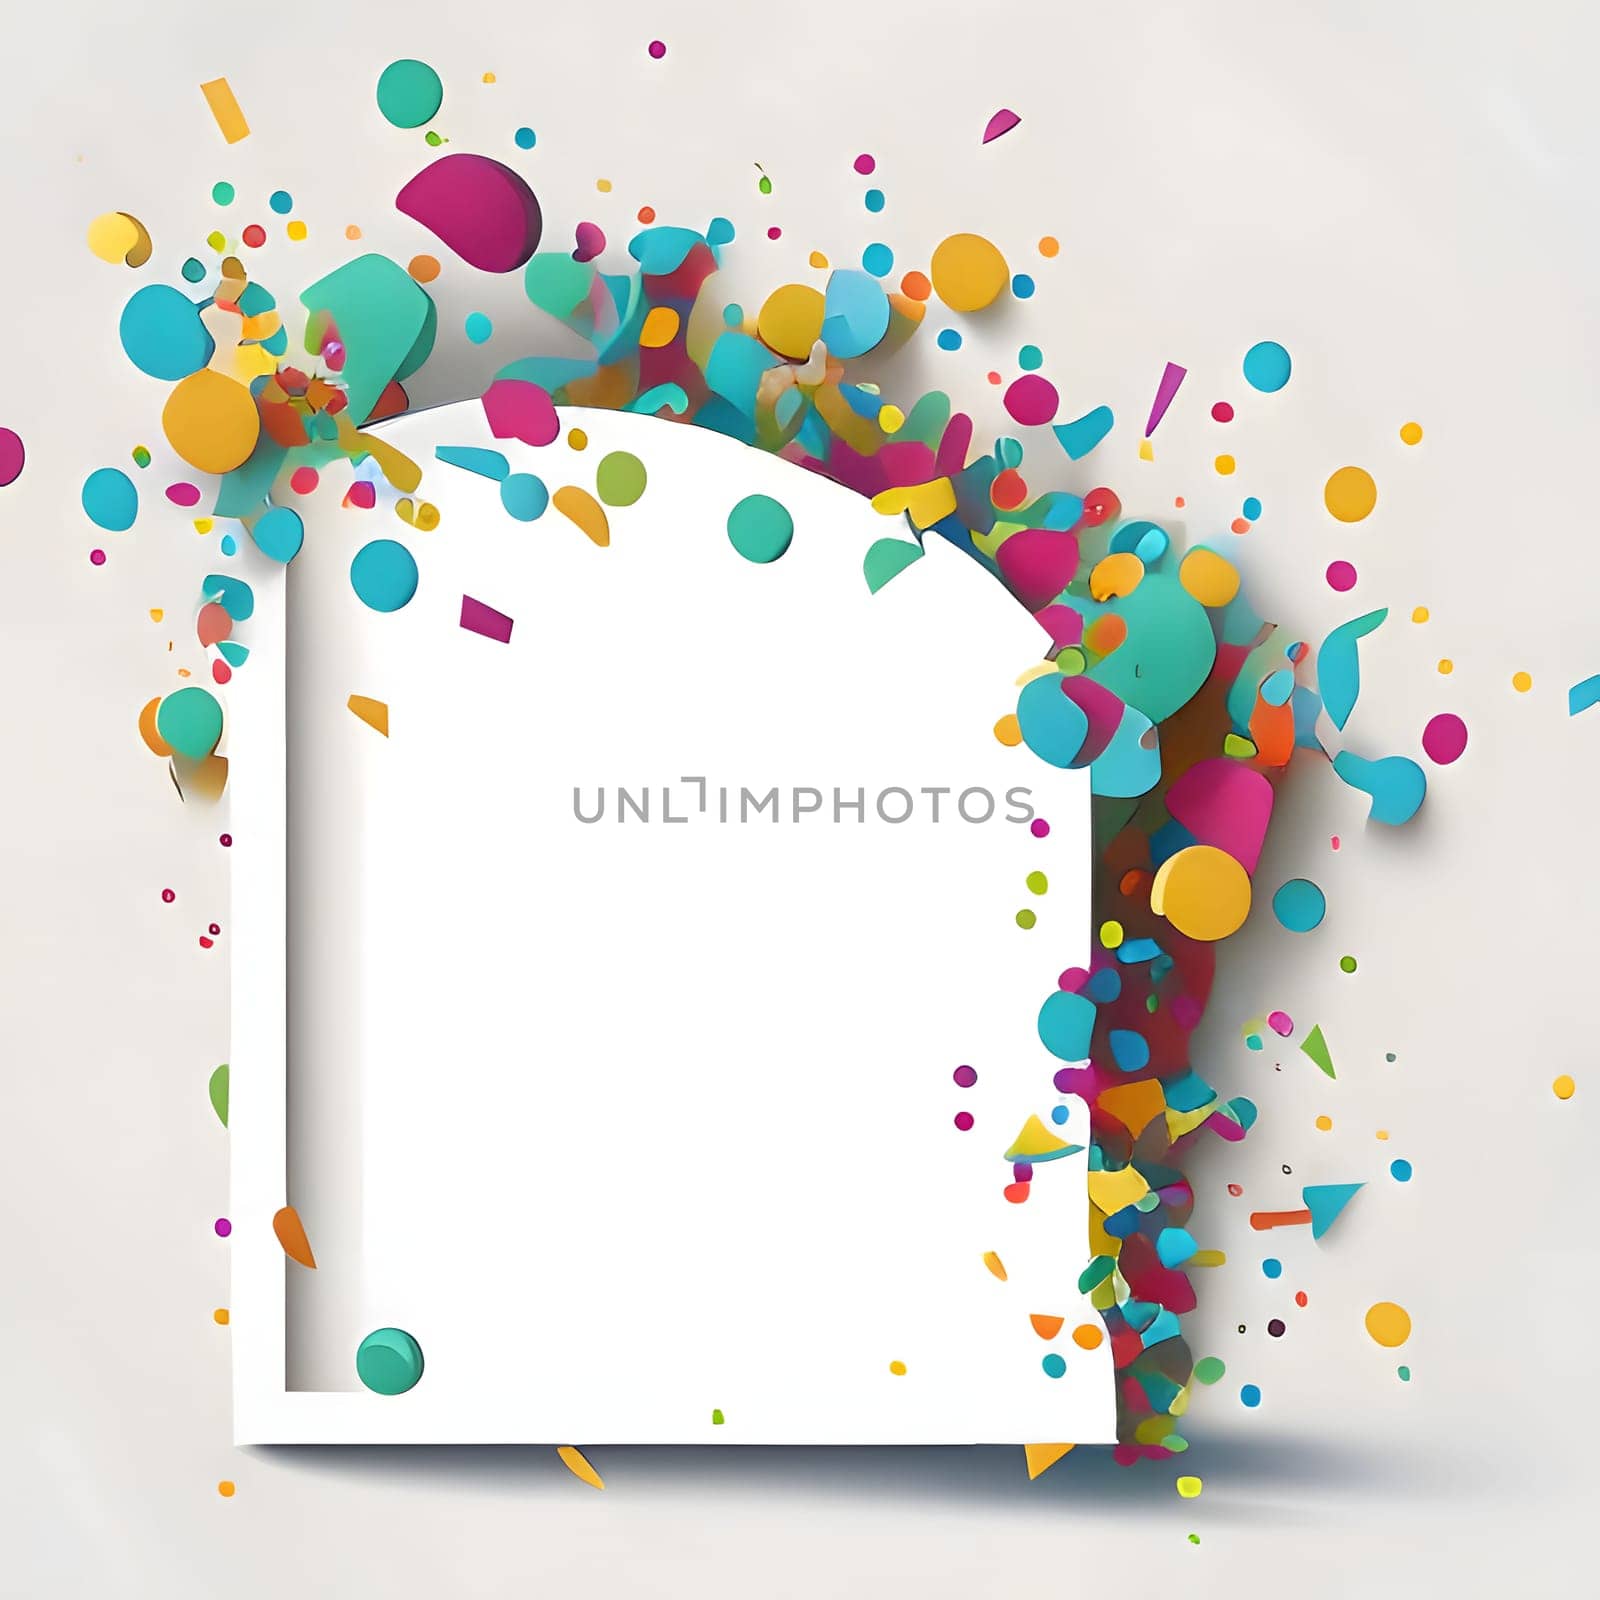 White blank card with space for your own content, around colored confetti. New Year fun and festivities.